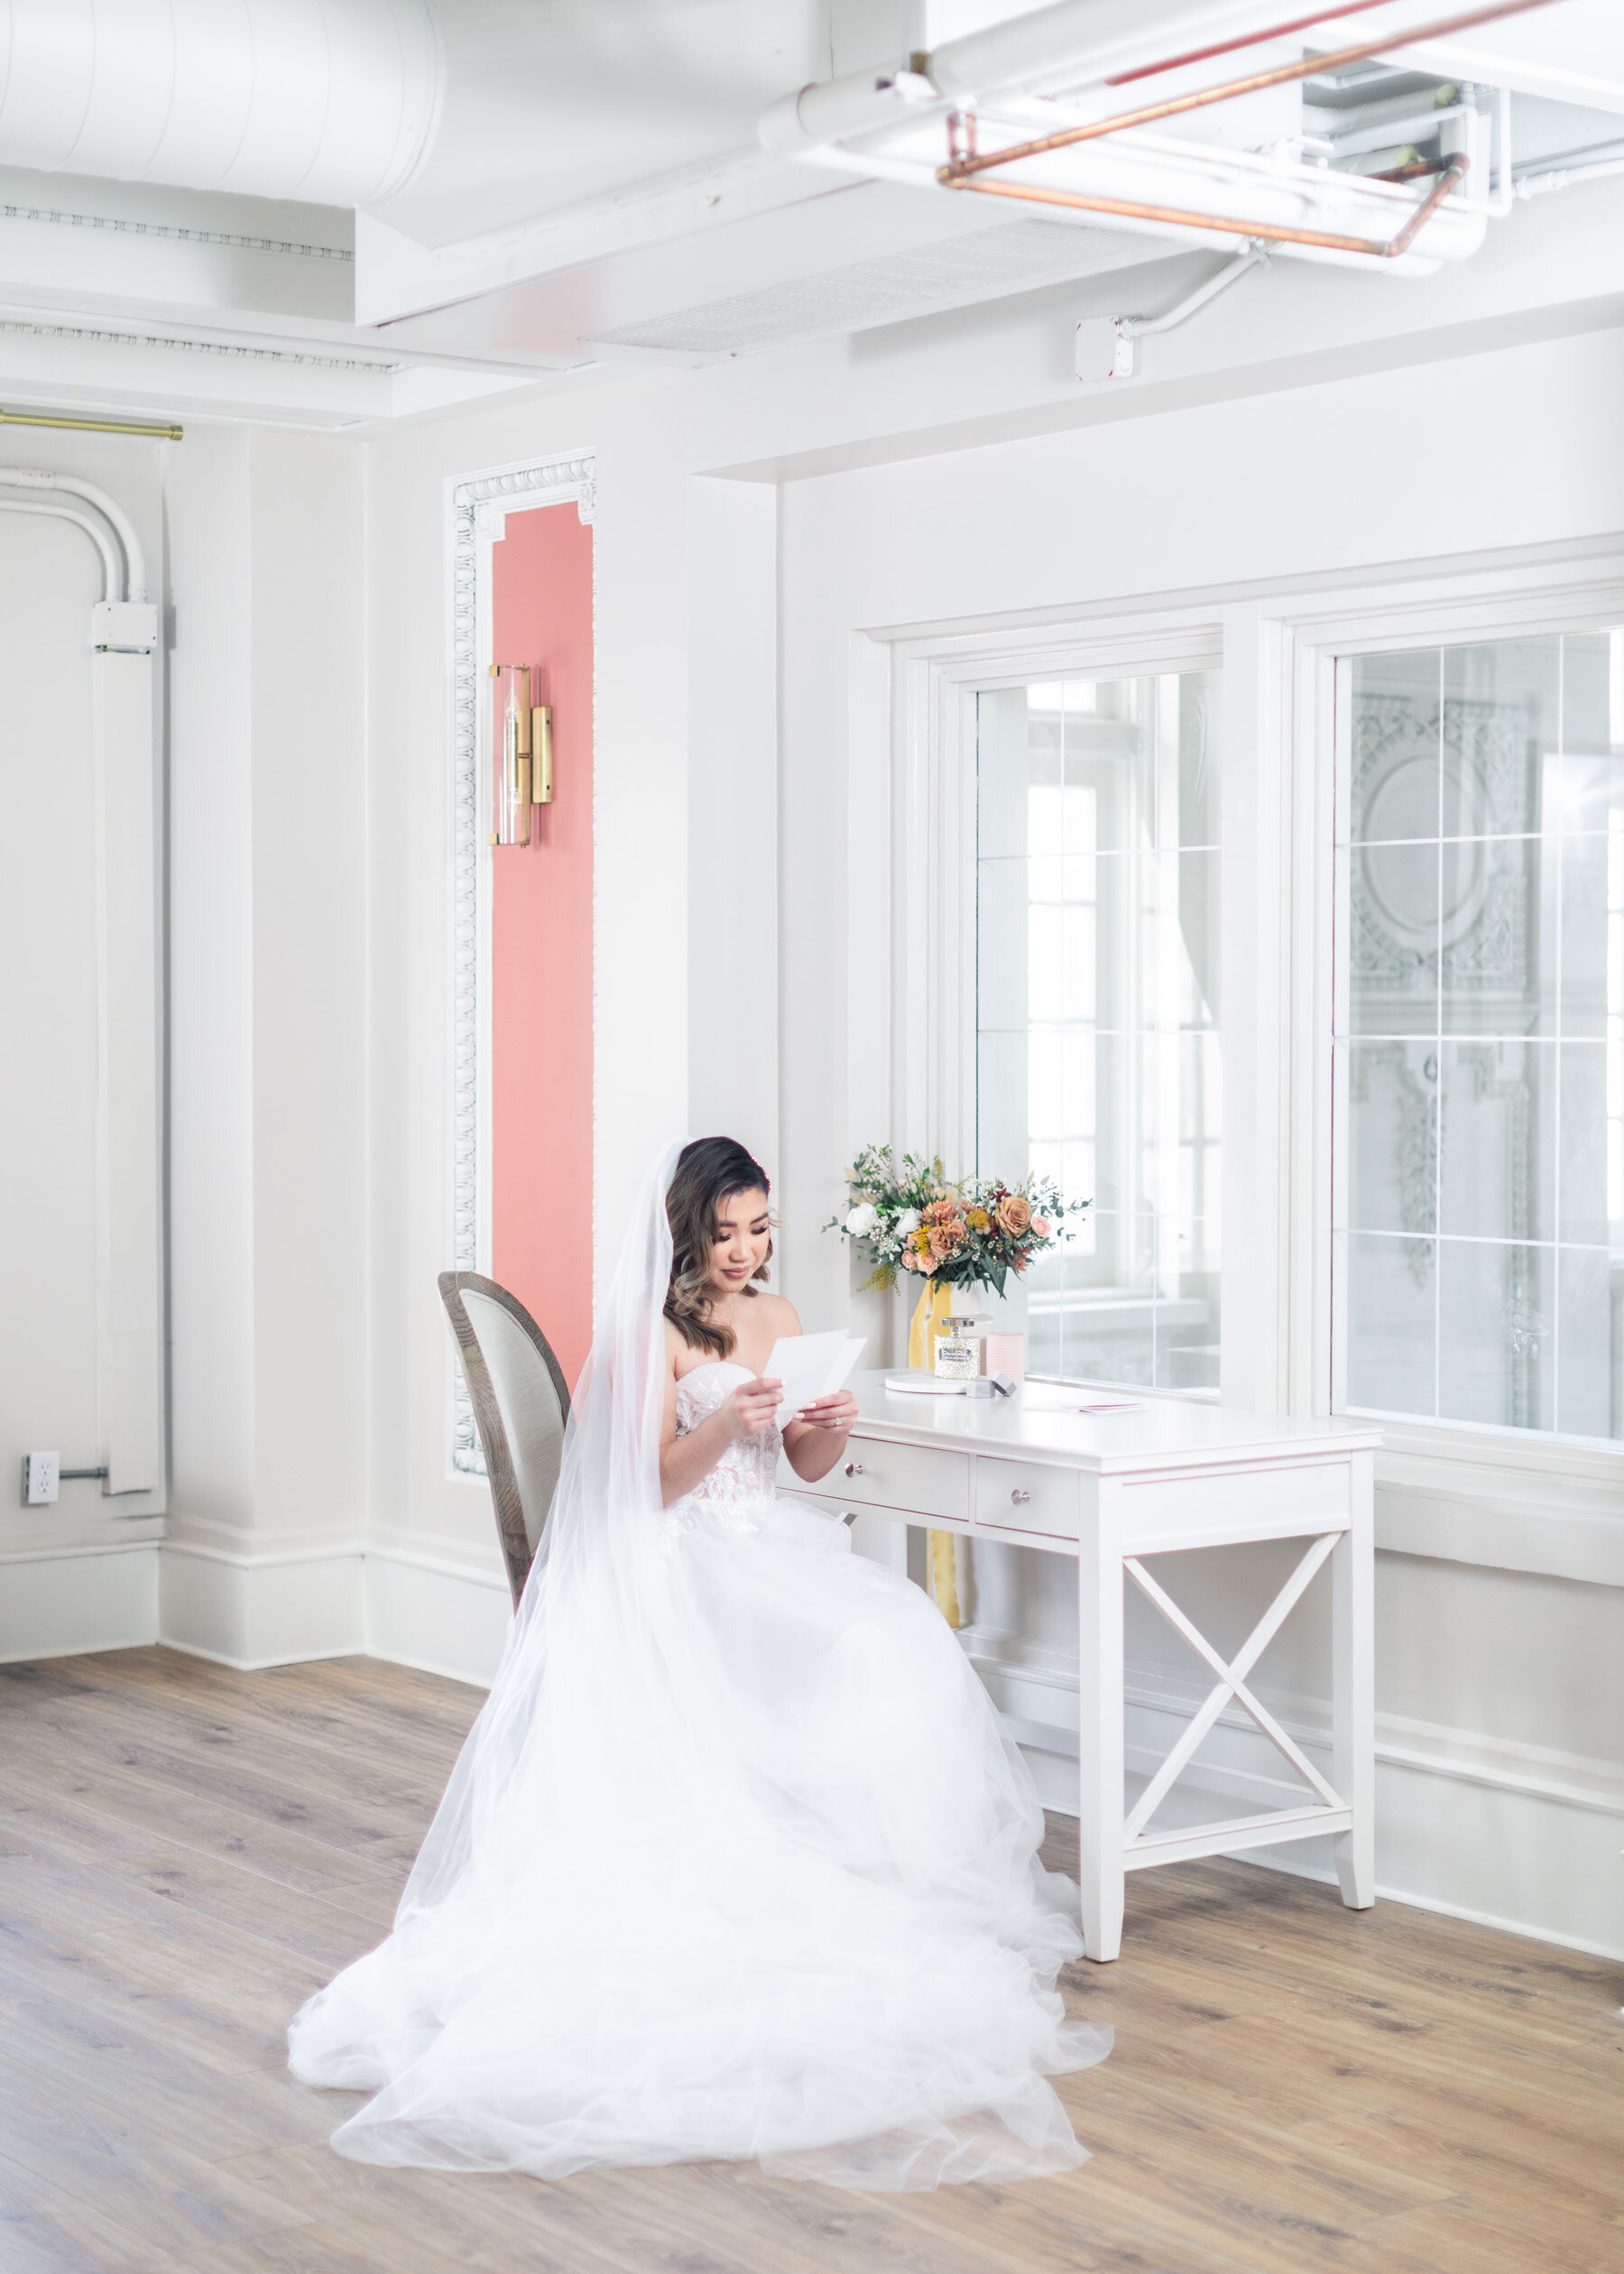  On this bride's wedding morning in Salt Lake City, UT, Clarity Lane captures this bride sitting at a white makeup vanity, reading a letter from her groom. wedding morning letters bride opening groom's gift Salt Lake City wedding photographer #Clarit